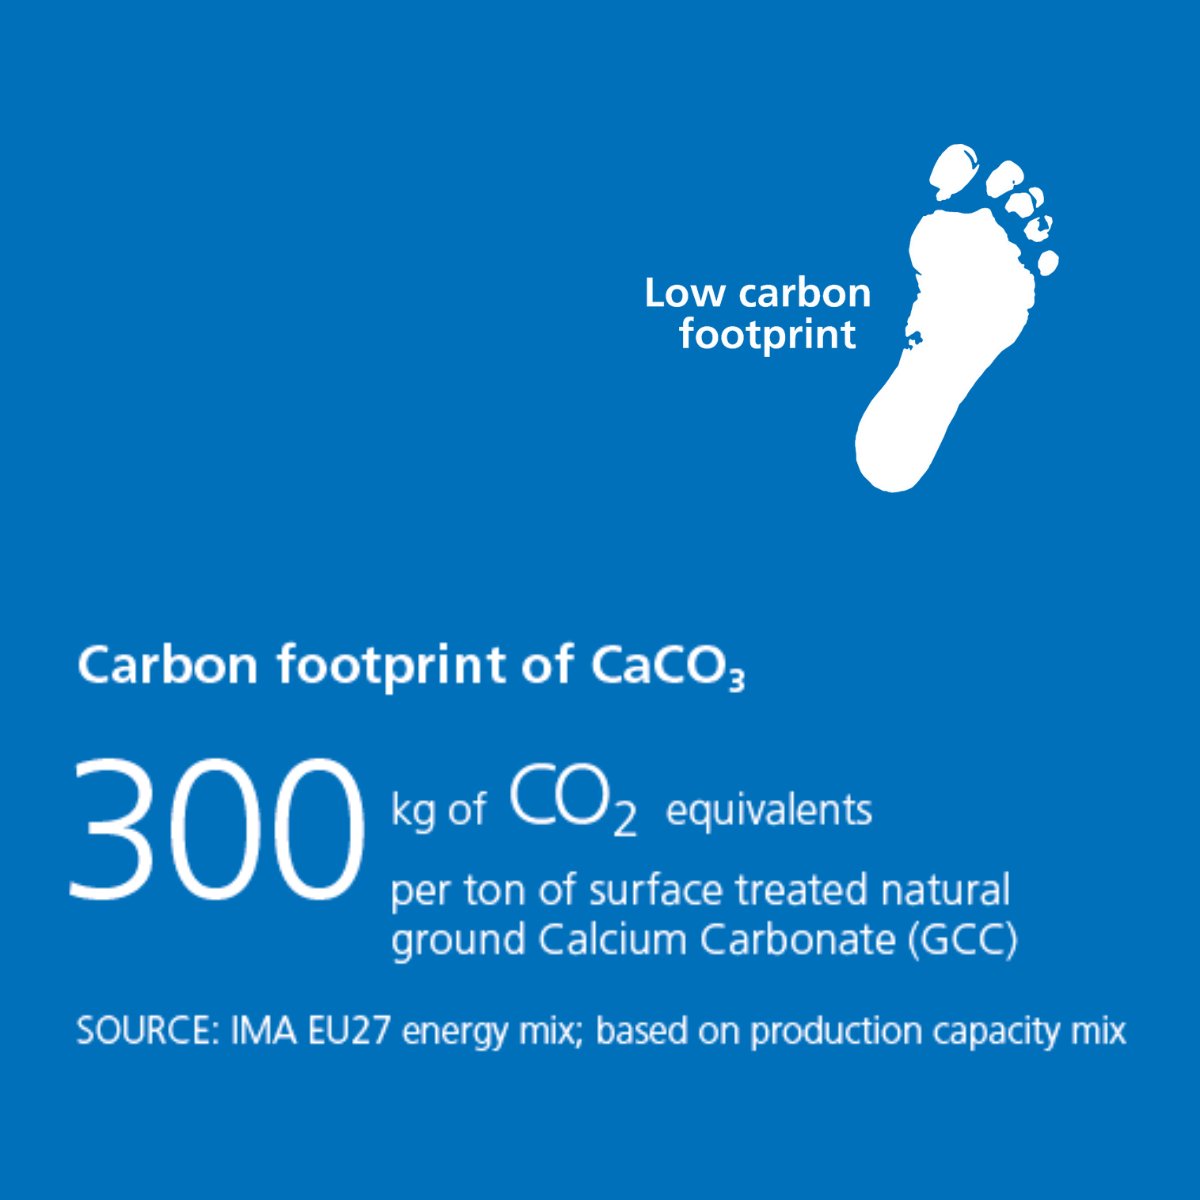 Carbon footprint of CaCO3